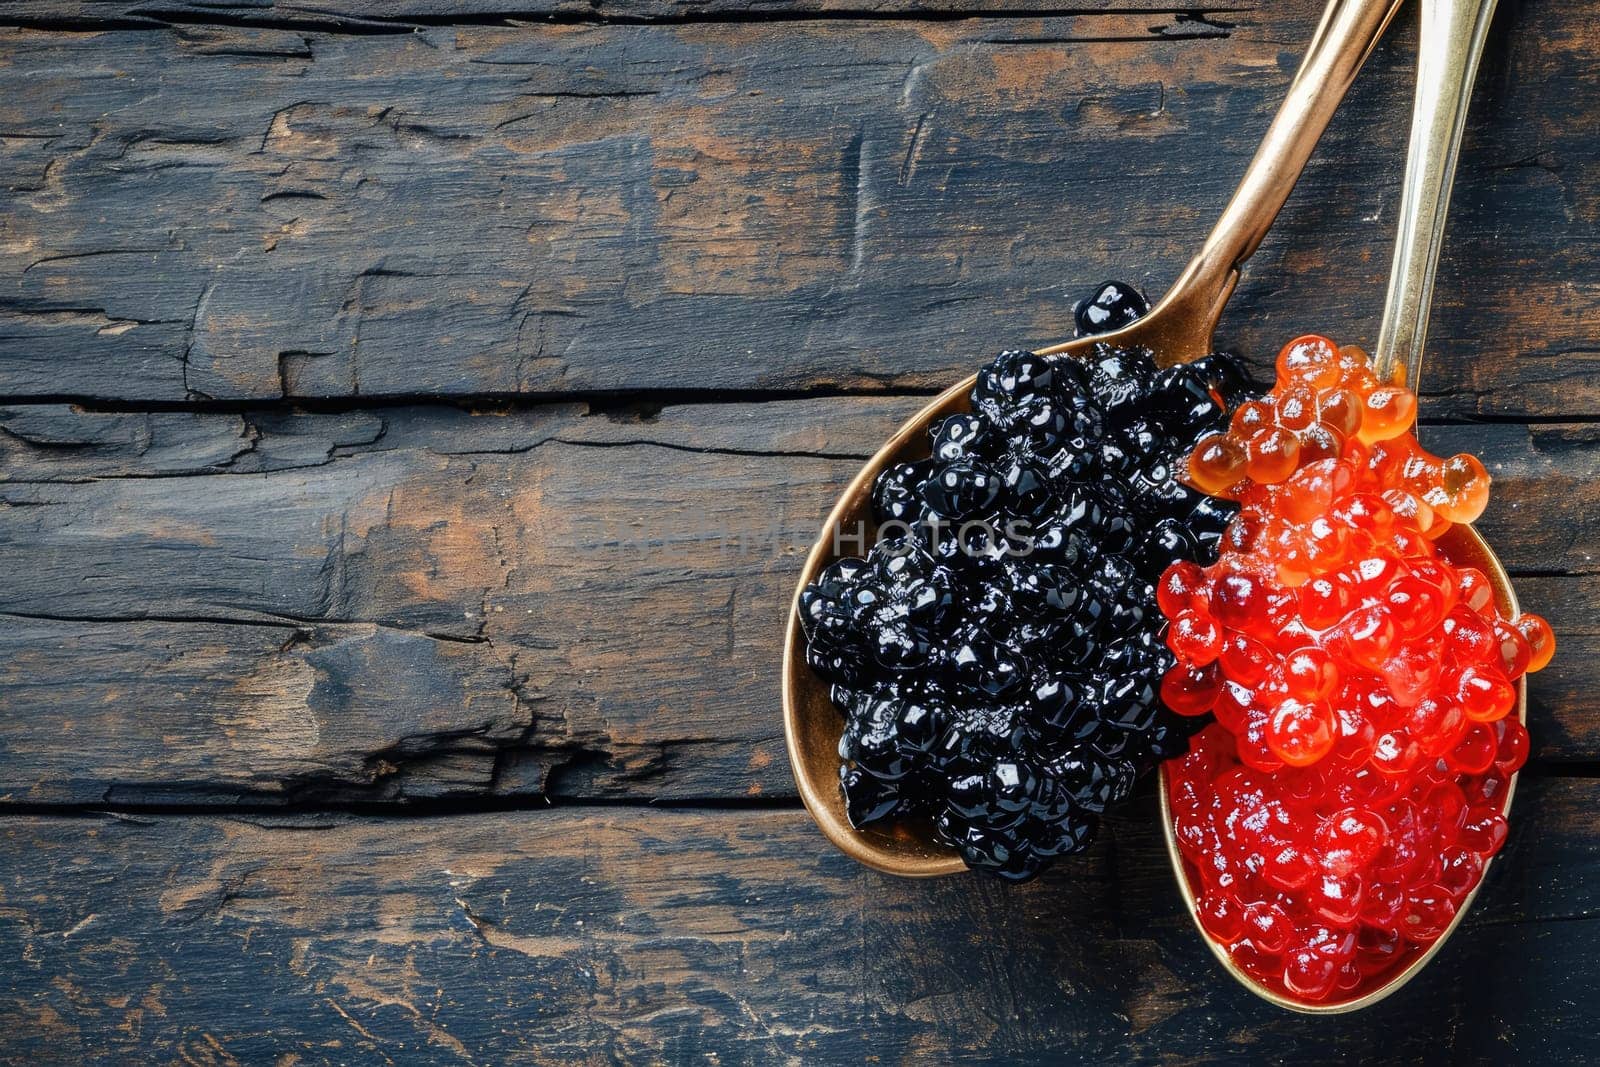 A spoon with red and black caviar shows its beauty on a natural wooden background